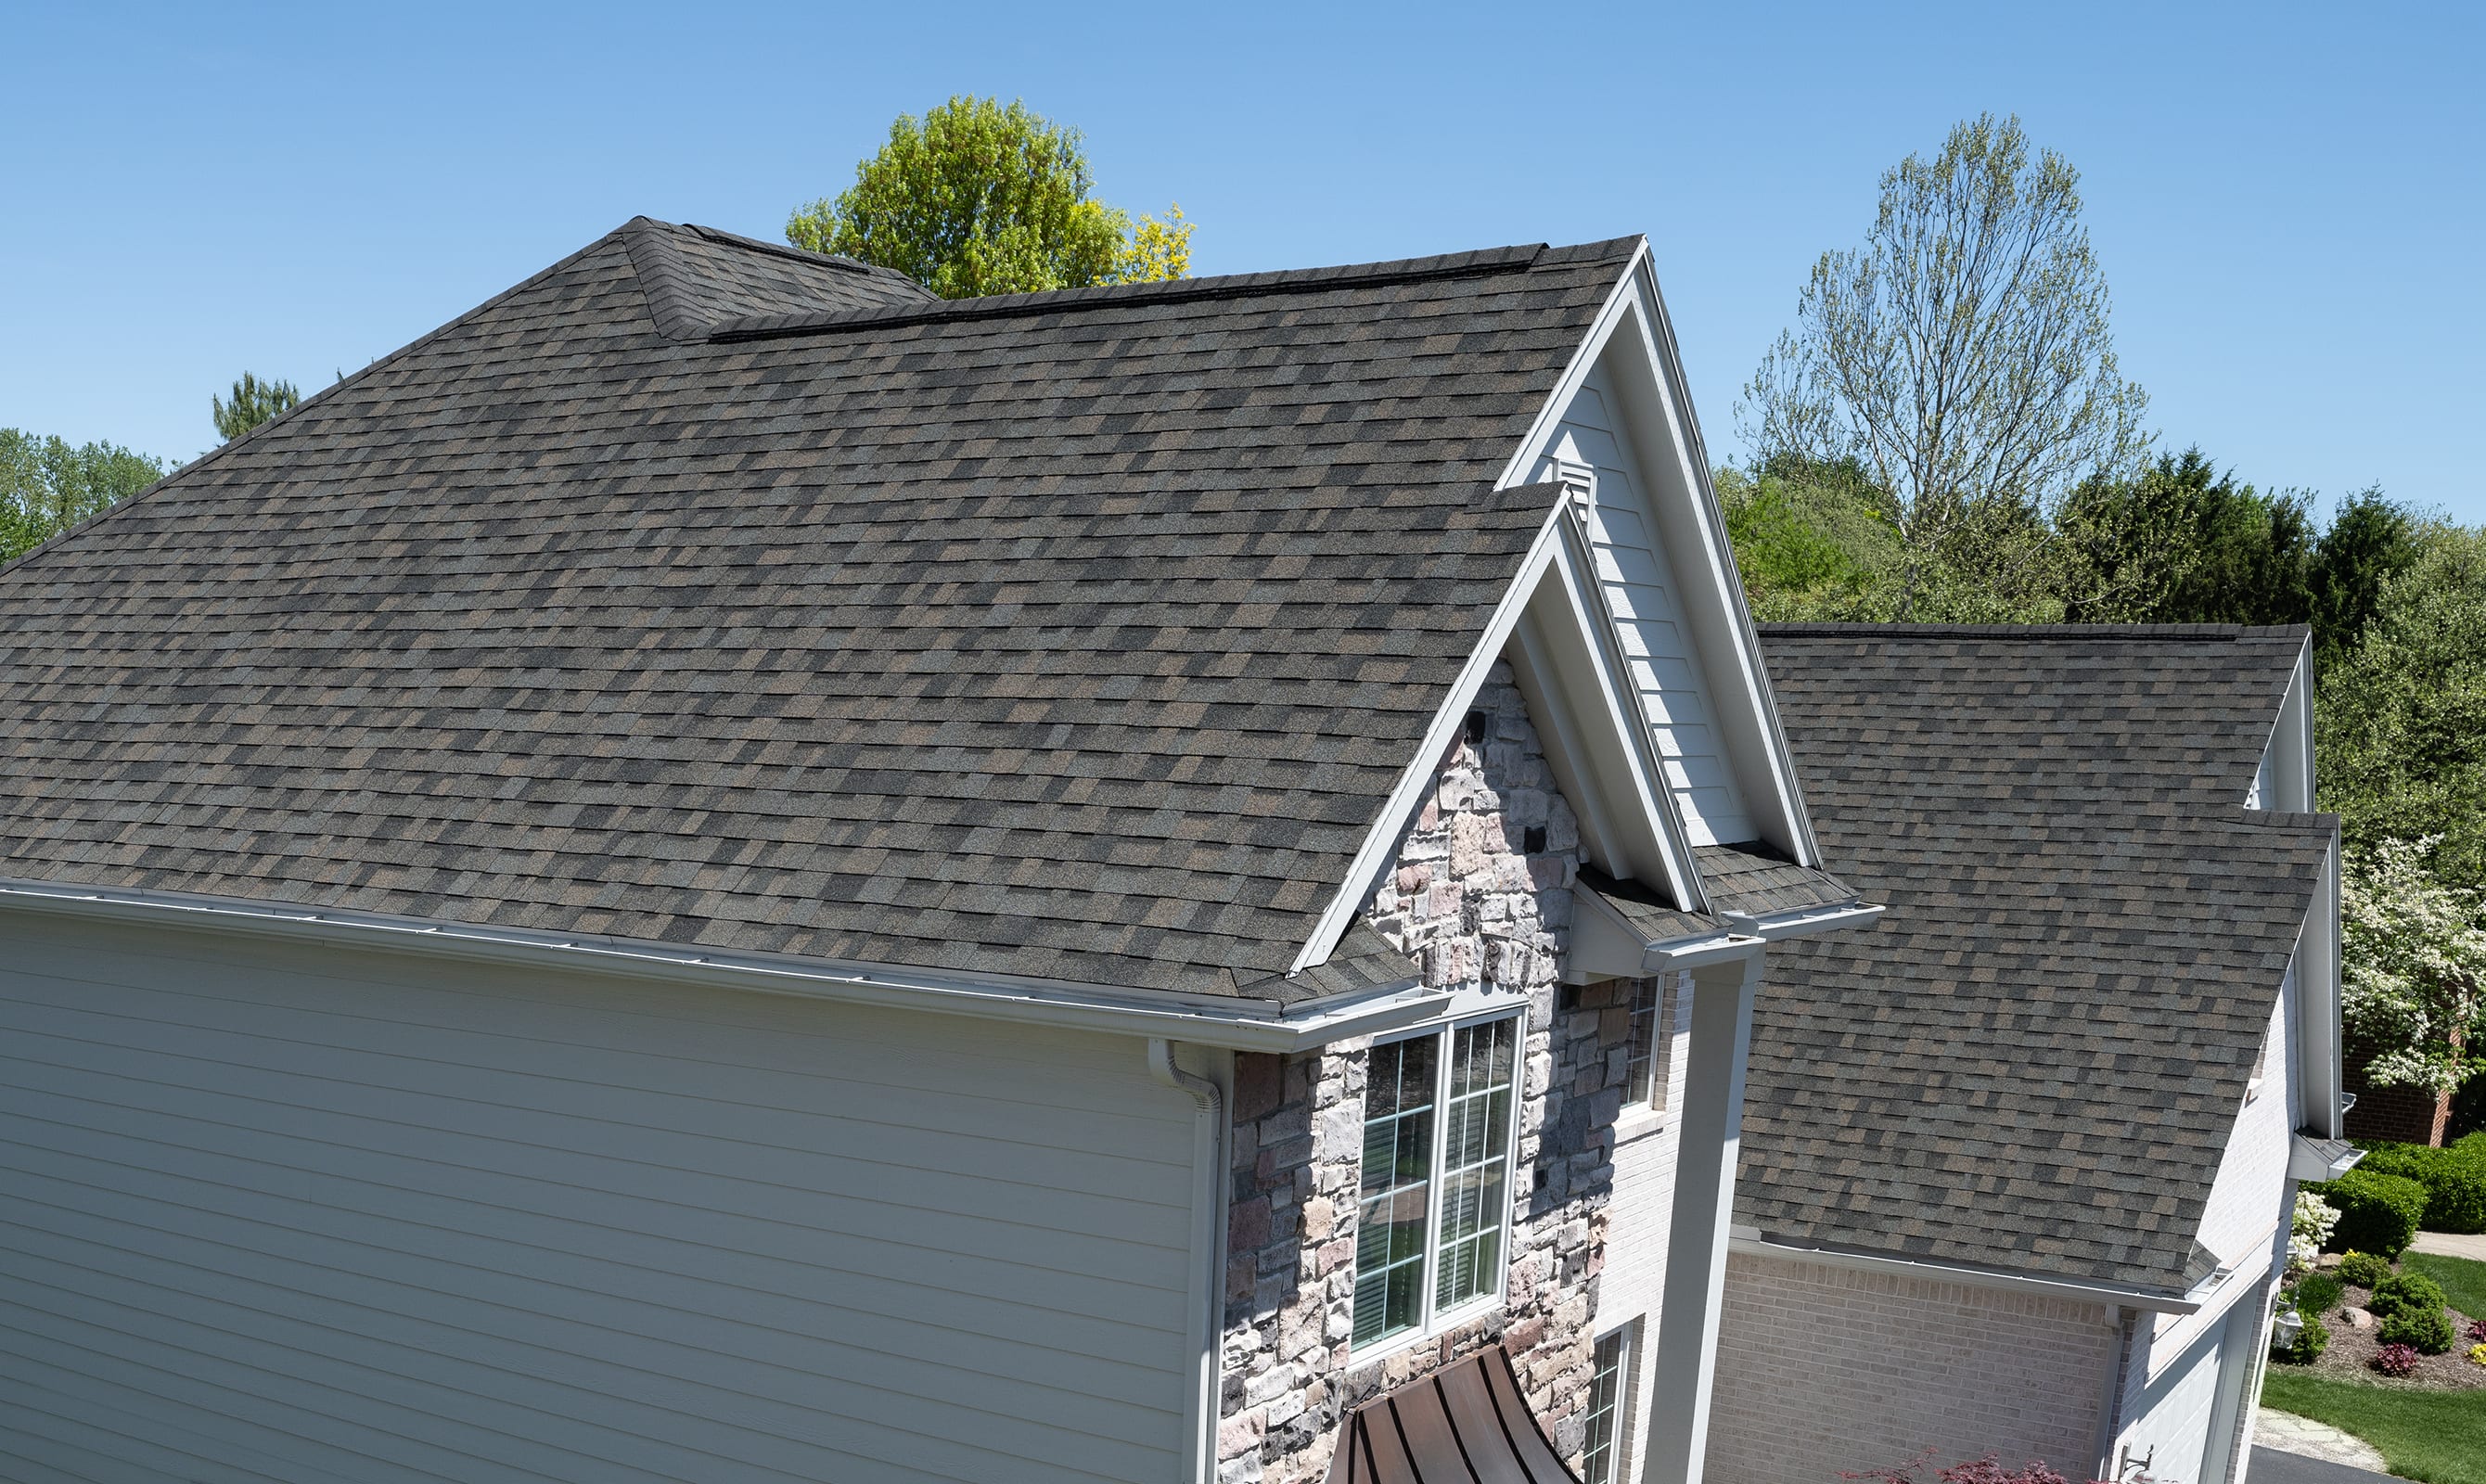 Owens Corning Shingle Roof Installation Contractor Near You